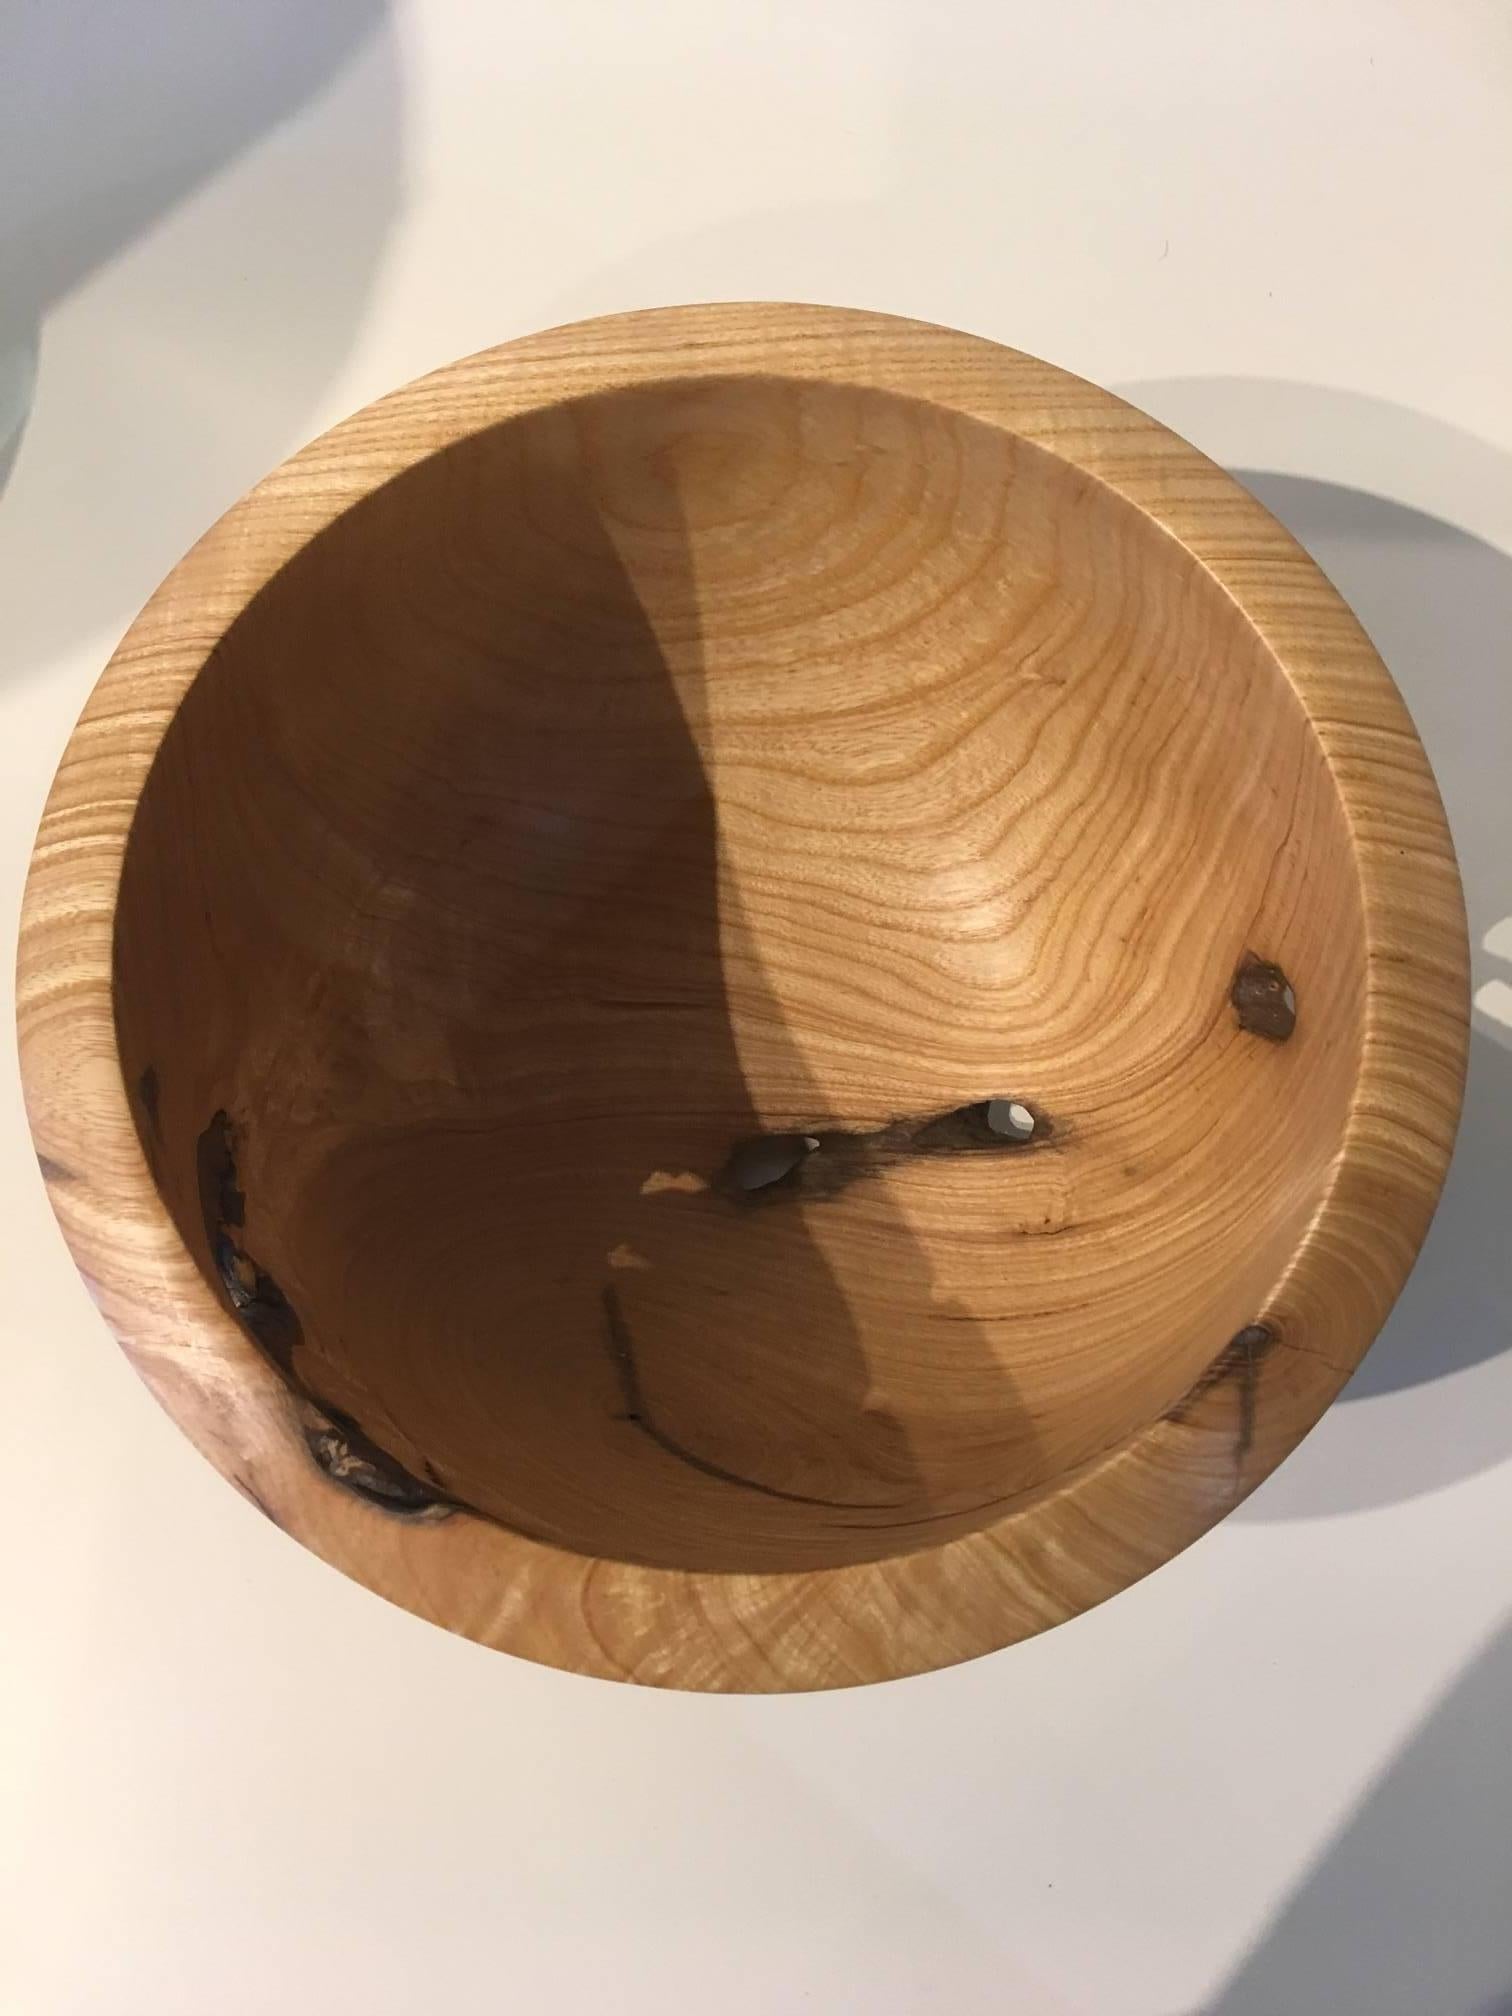 Lovely ash bowl handcrafted by a North Carolina artisan. Food safe, but also great for its sculptural value and a great display piece.